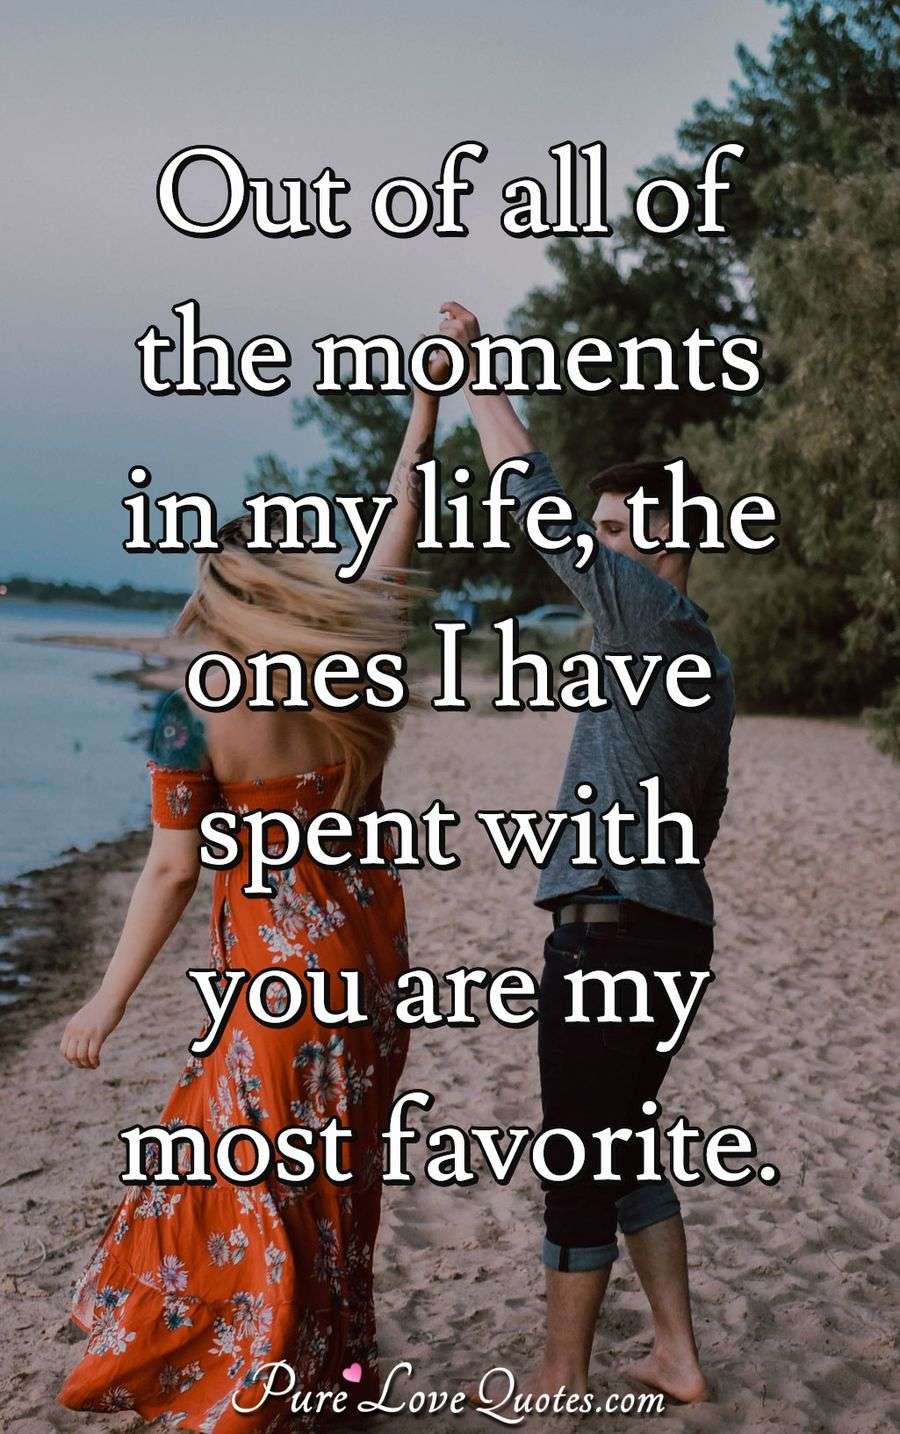 Out of all of the moments in my life, the ones I have spent with you are my most favorite. - Anonymous